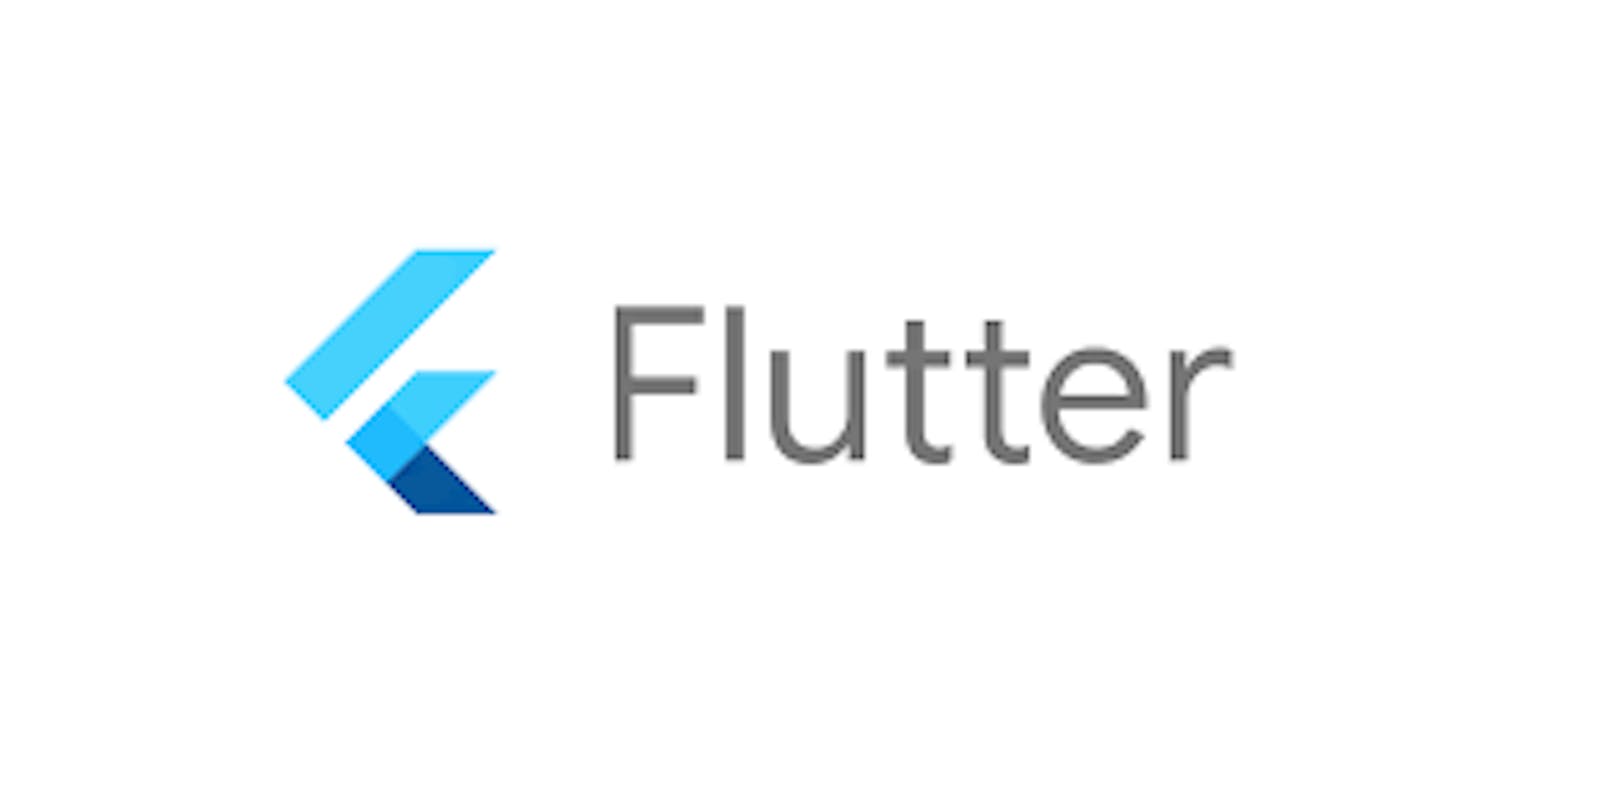 How to create Fullstate widget in flutter manually